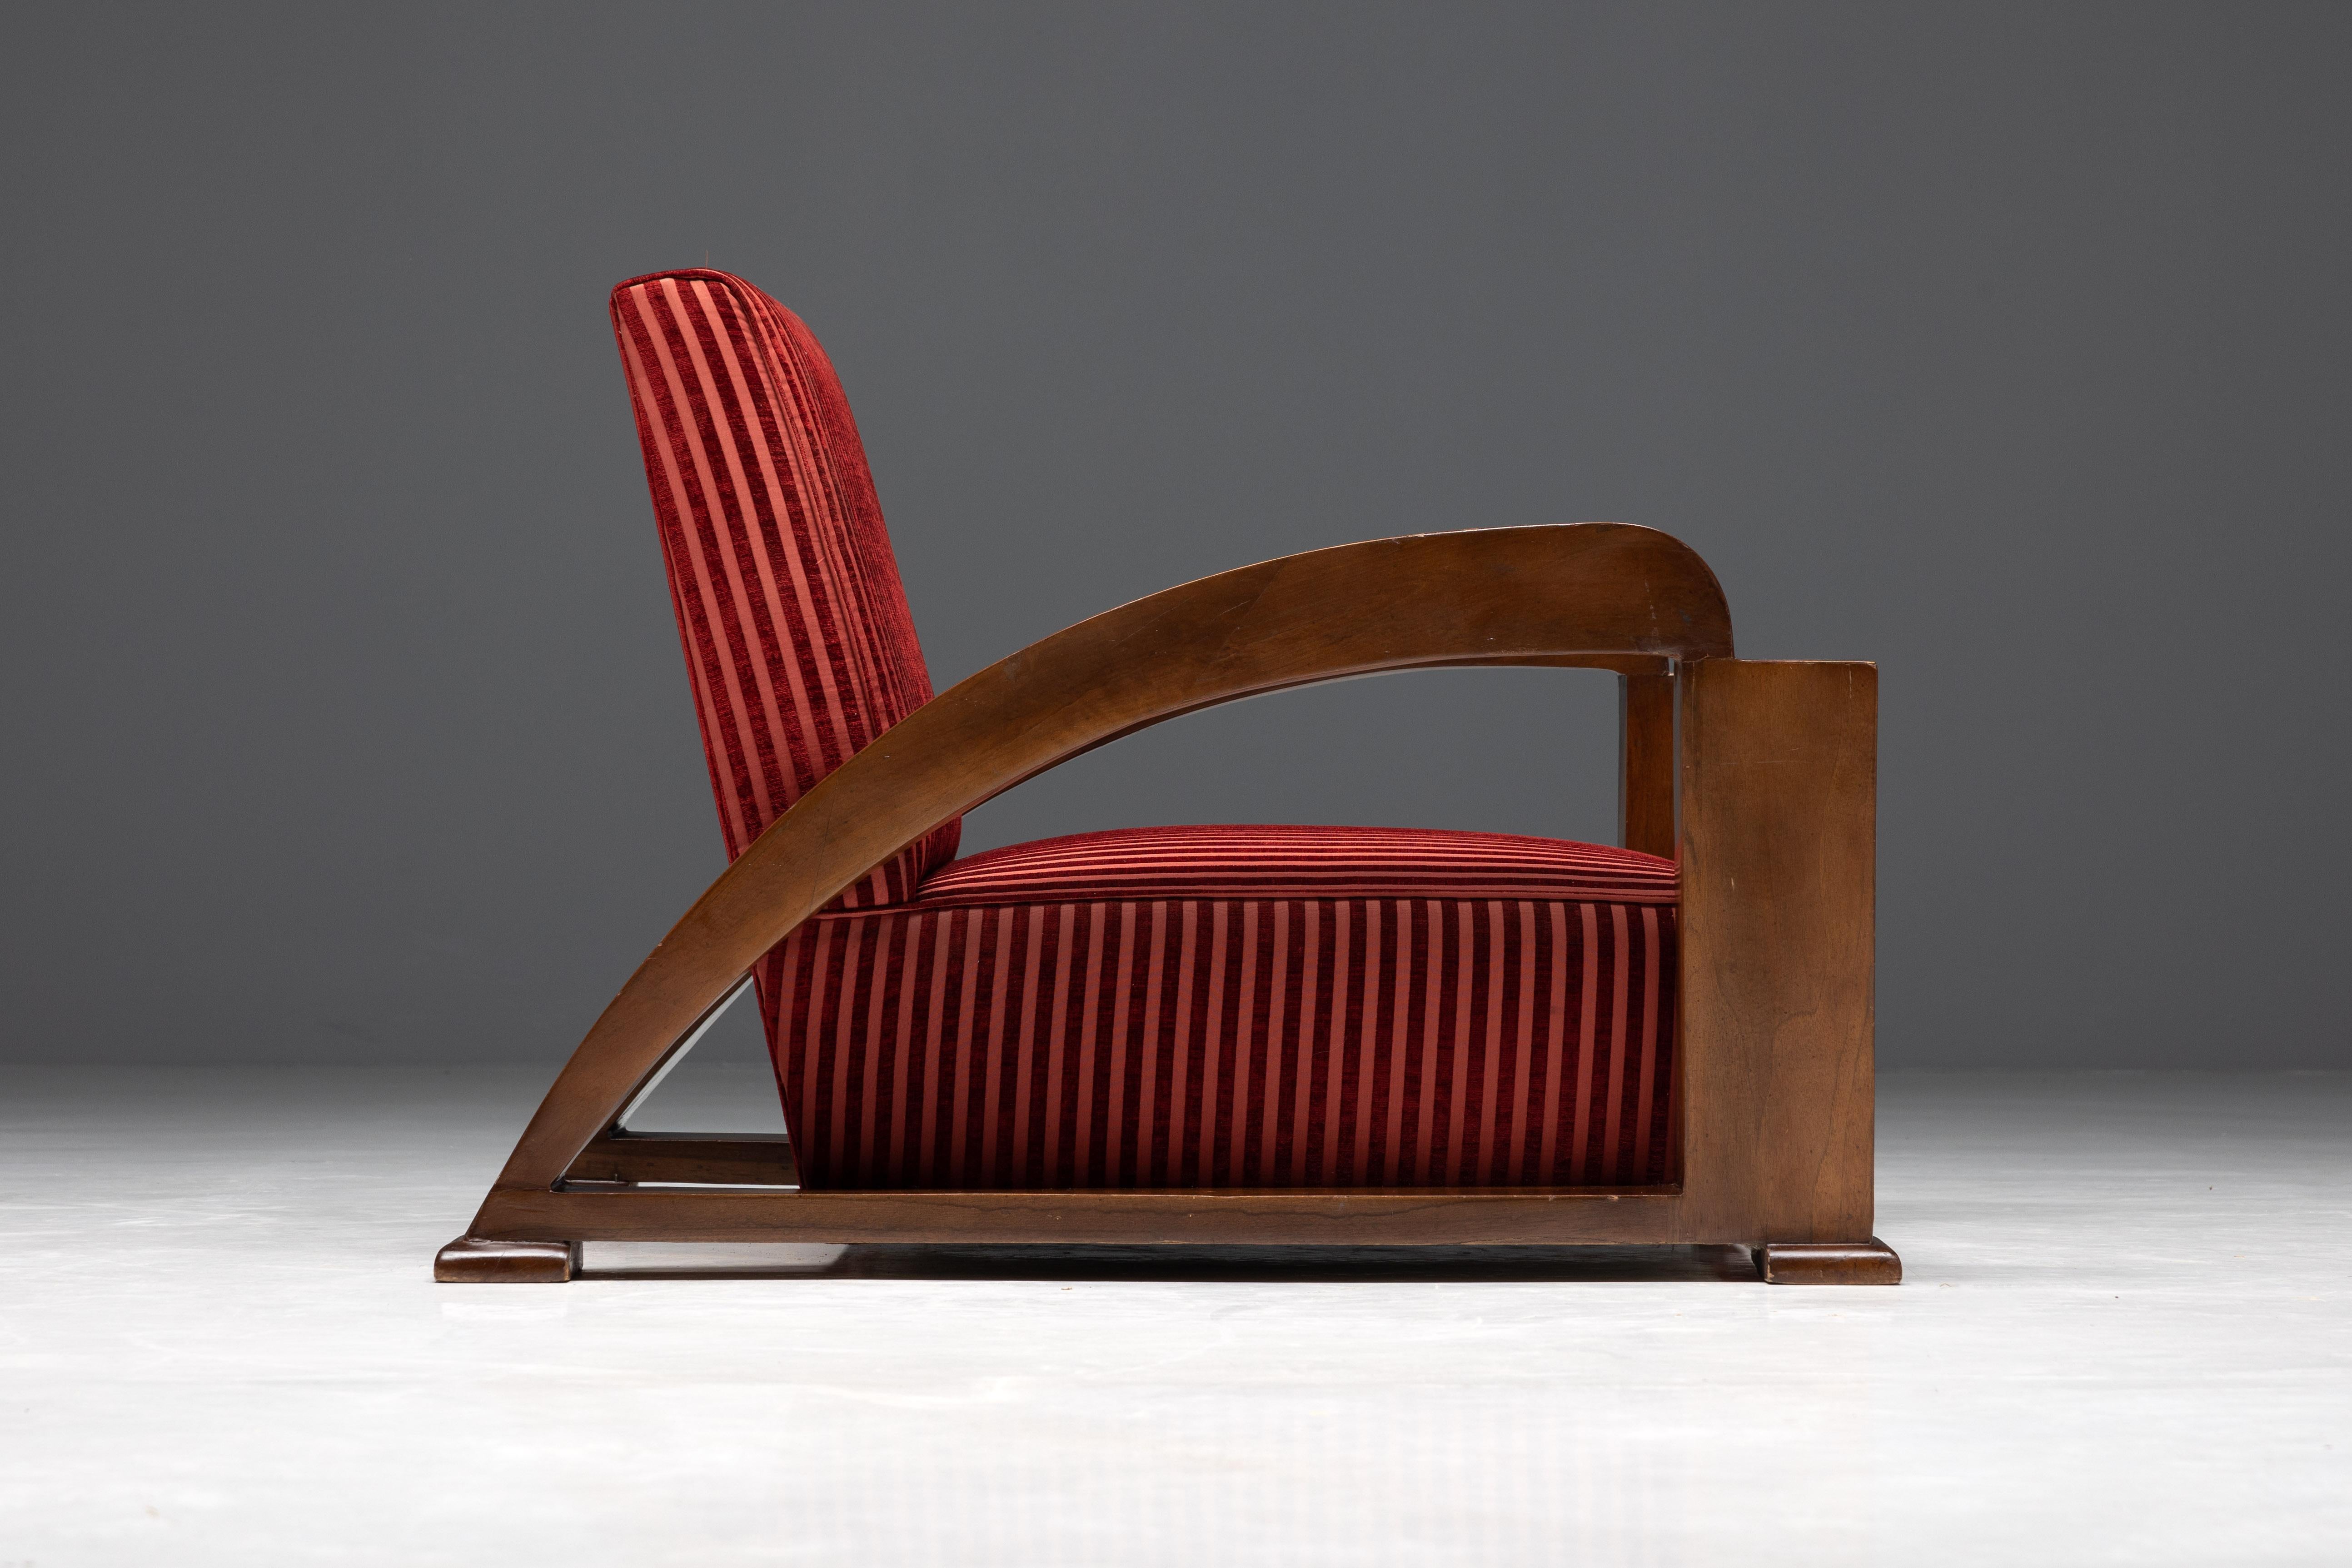 Art Deco Armchairs in Red Striped Velvet and with Swoosh Armrests, France, 1940s For Sale 8